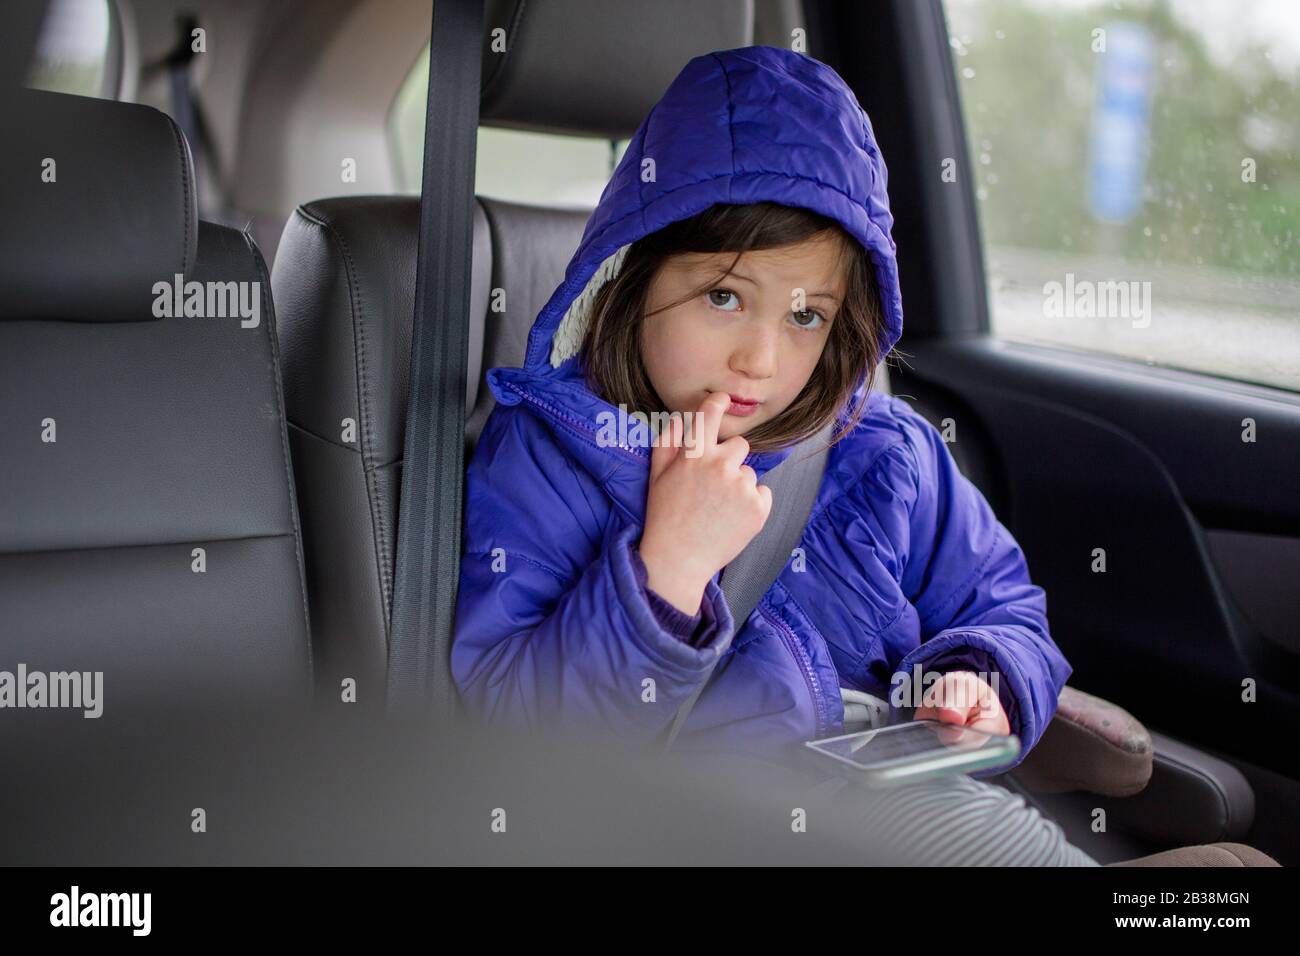 A little girl in the backseat of a car glances up from a phone Stock Photo